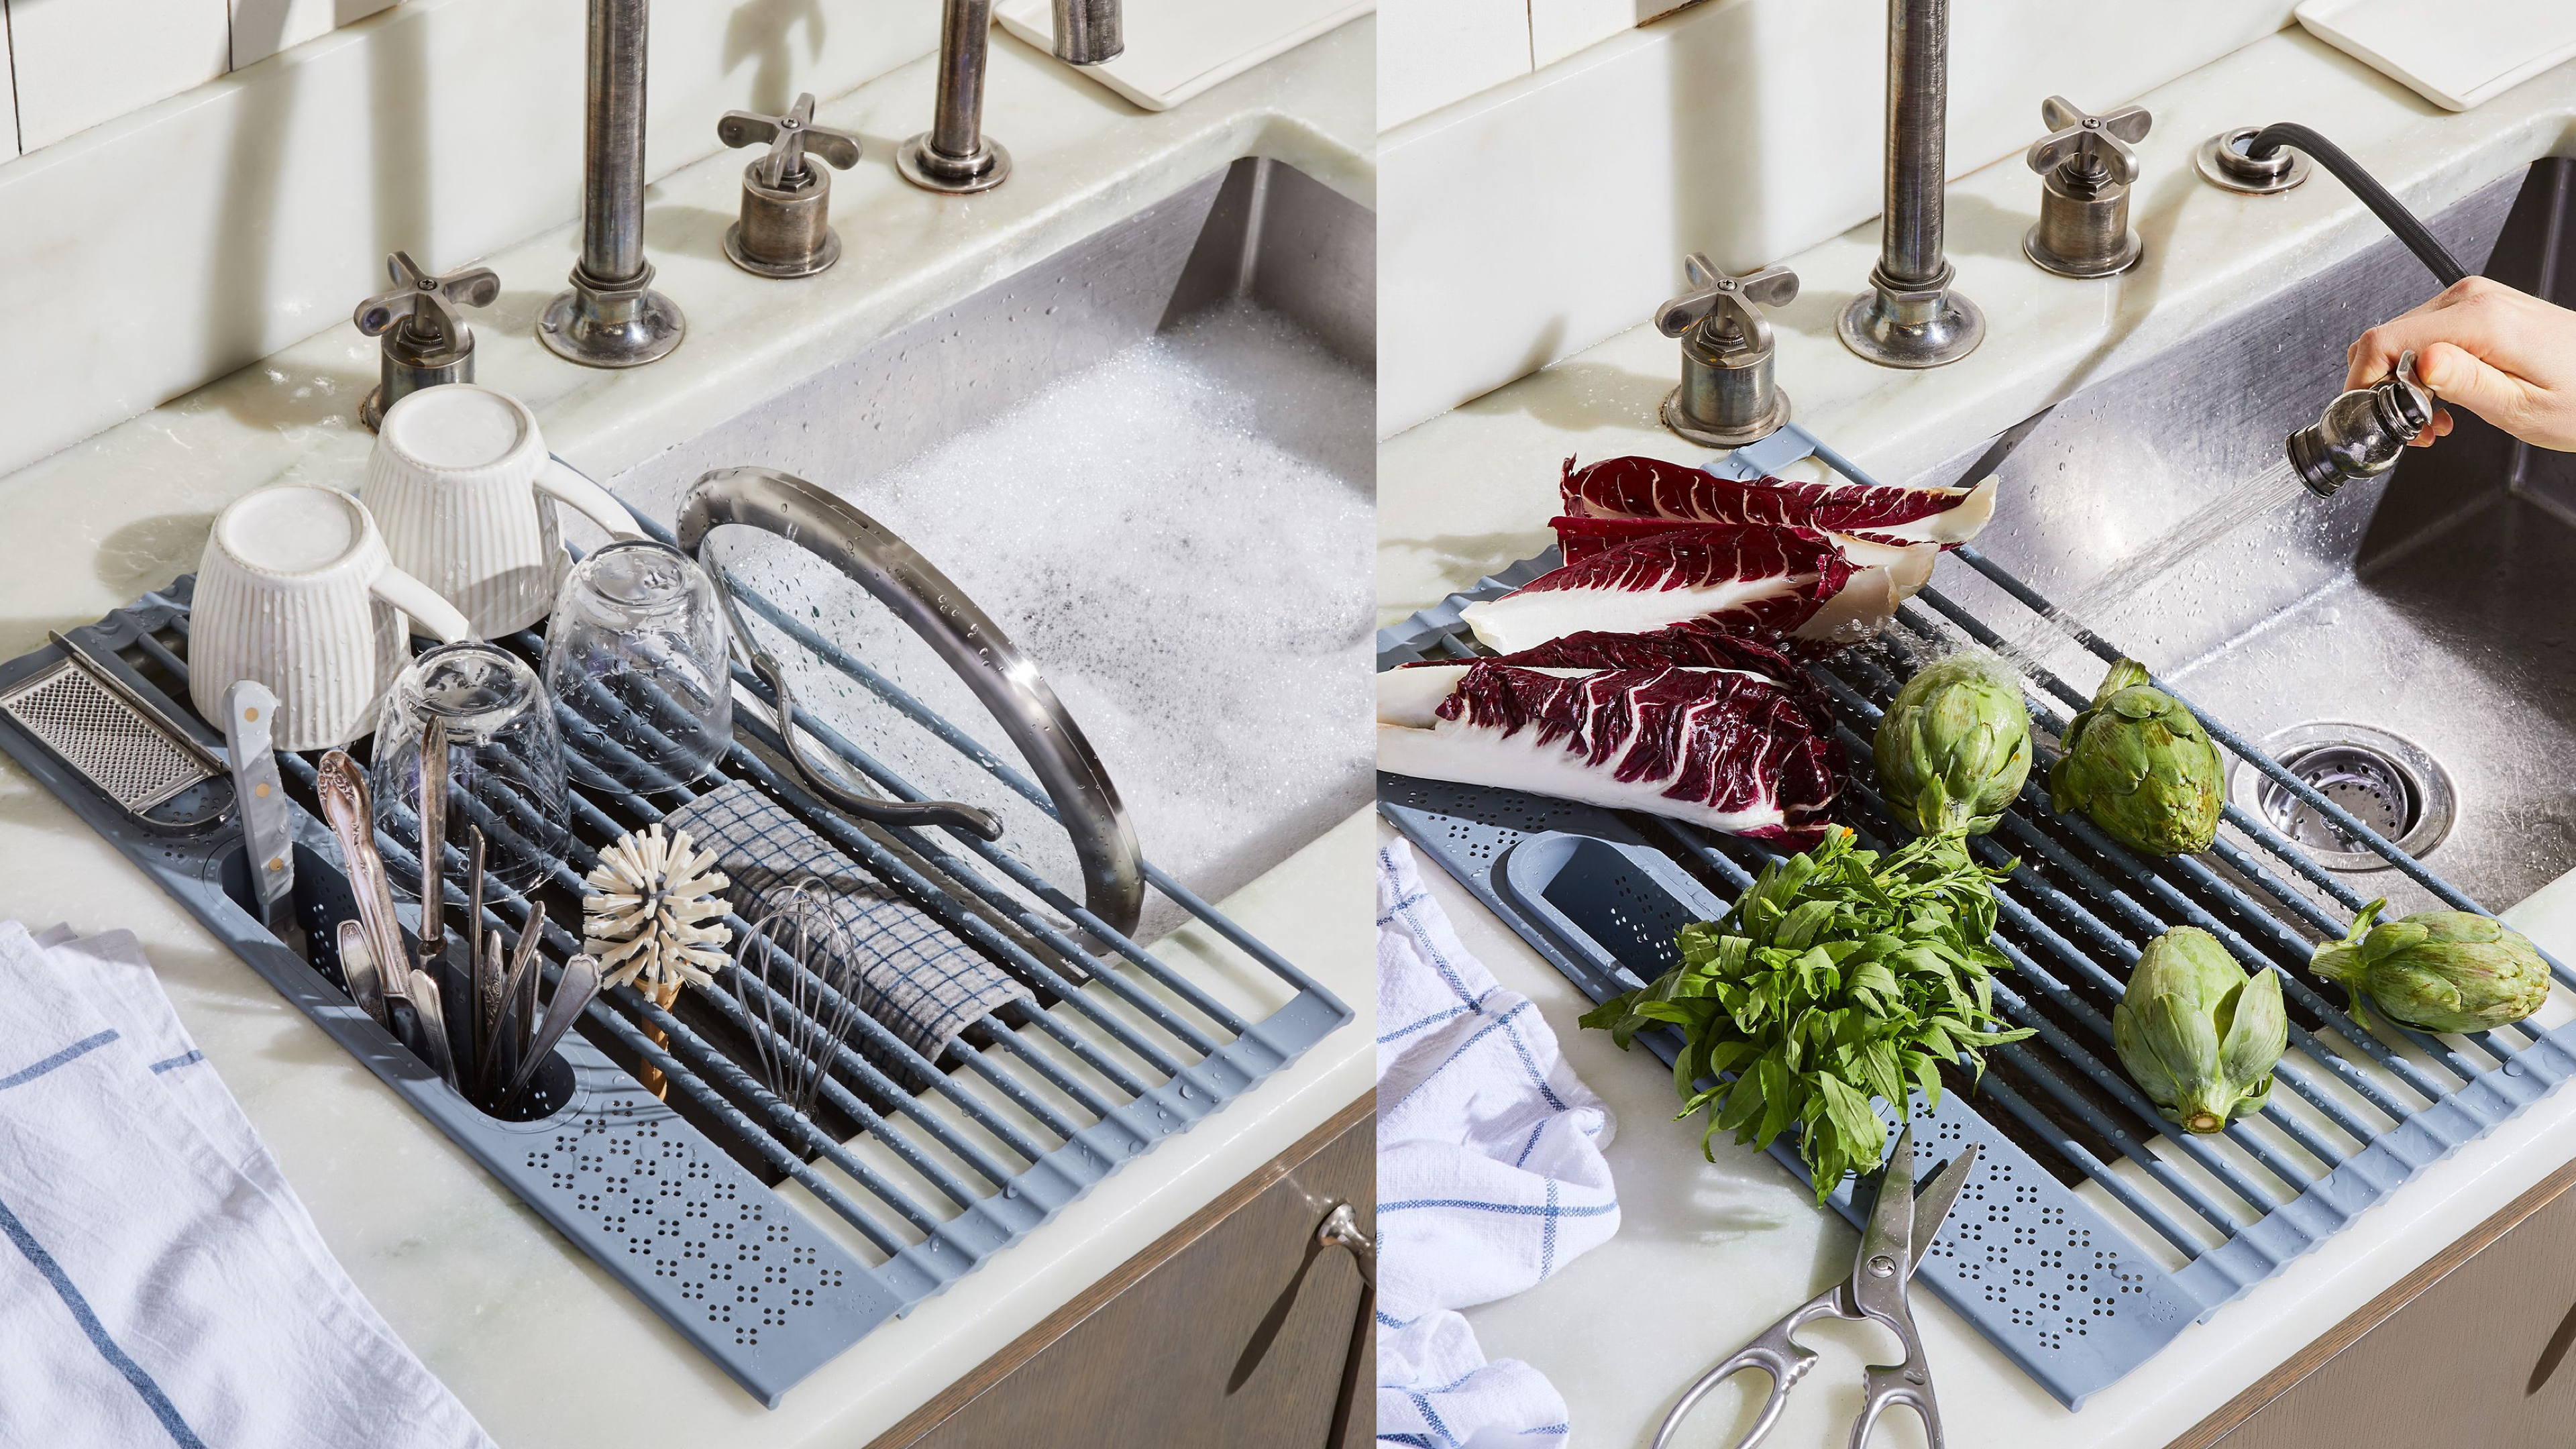 roll out drying rack that can sit over your sink and be put away once dishes are clean and dry